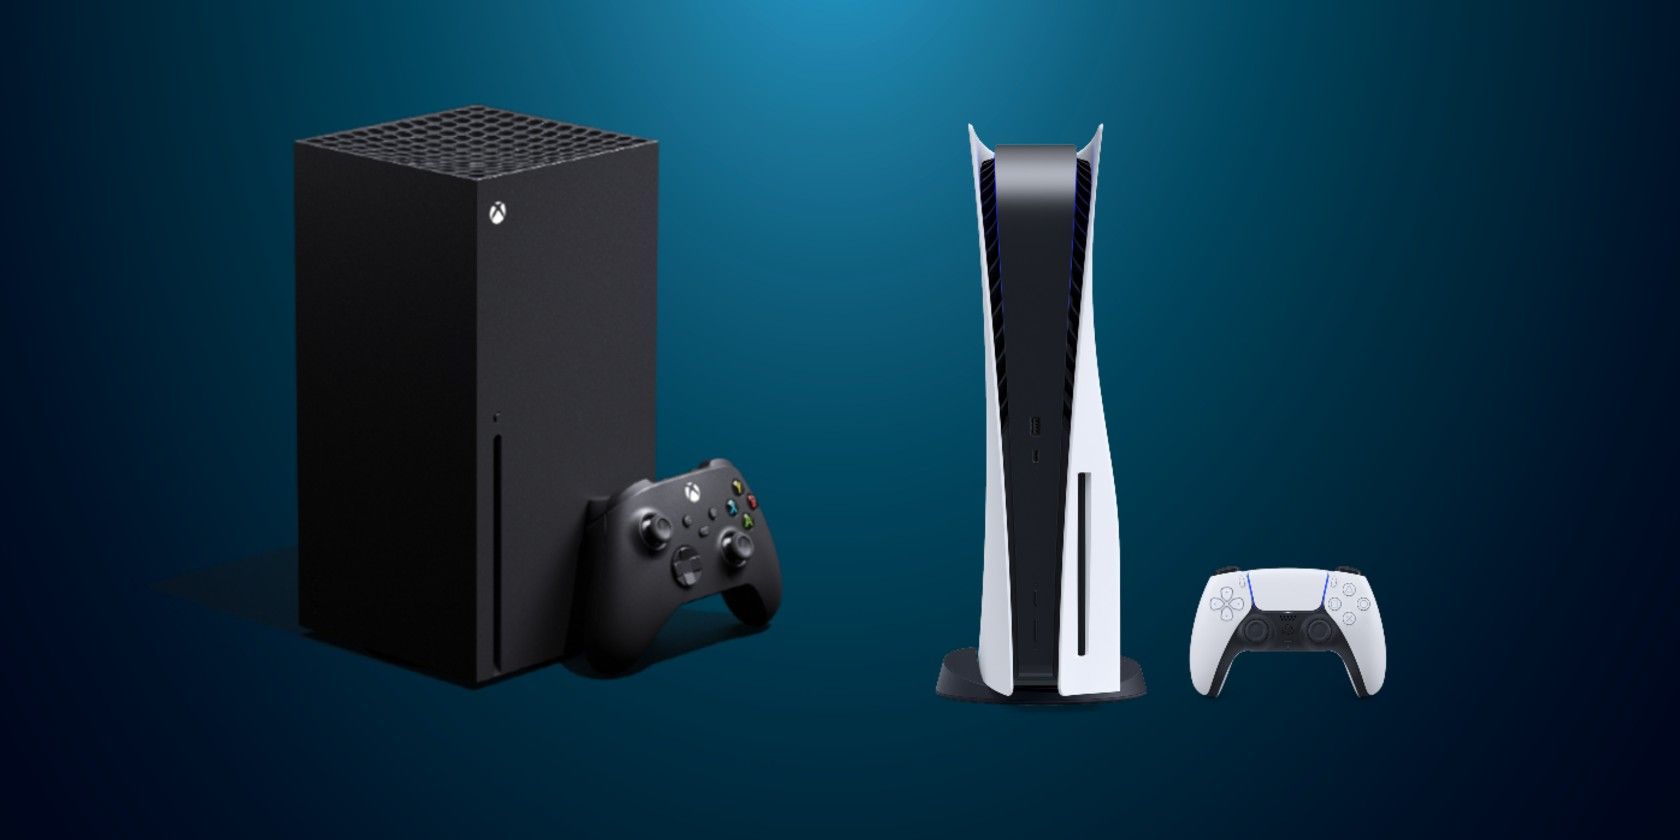 PS5 vs. Xbox Series X: The Battle of the Specs